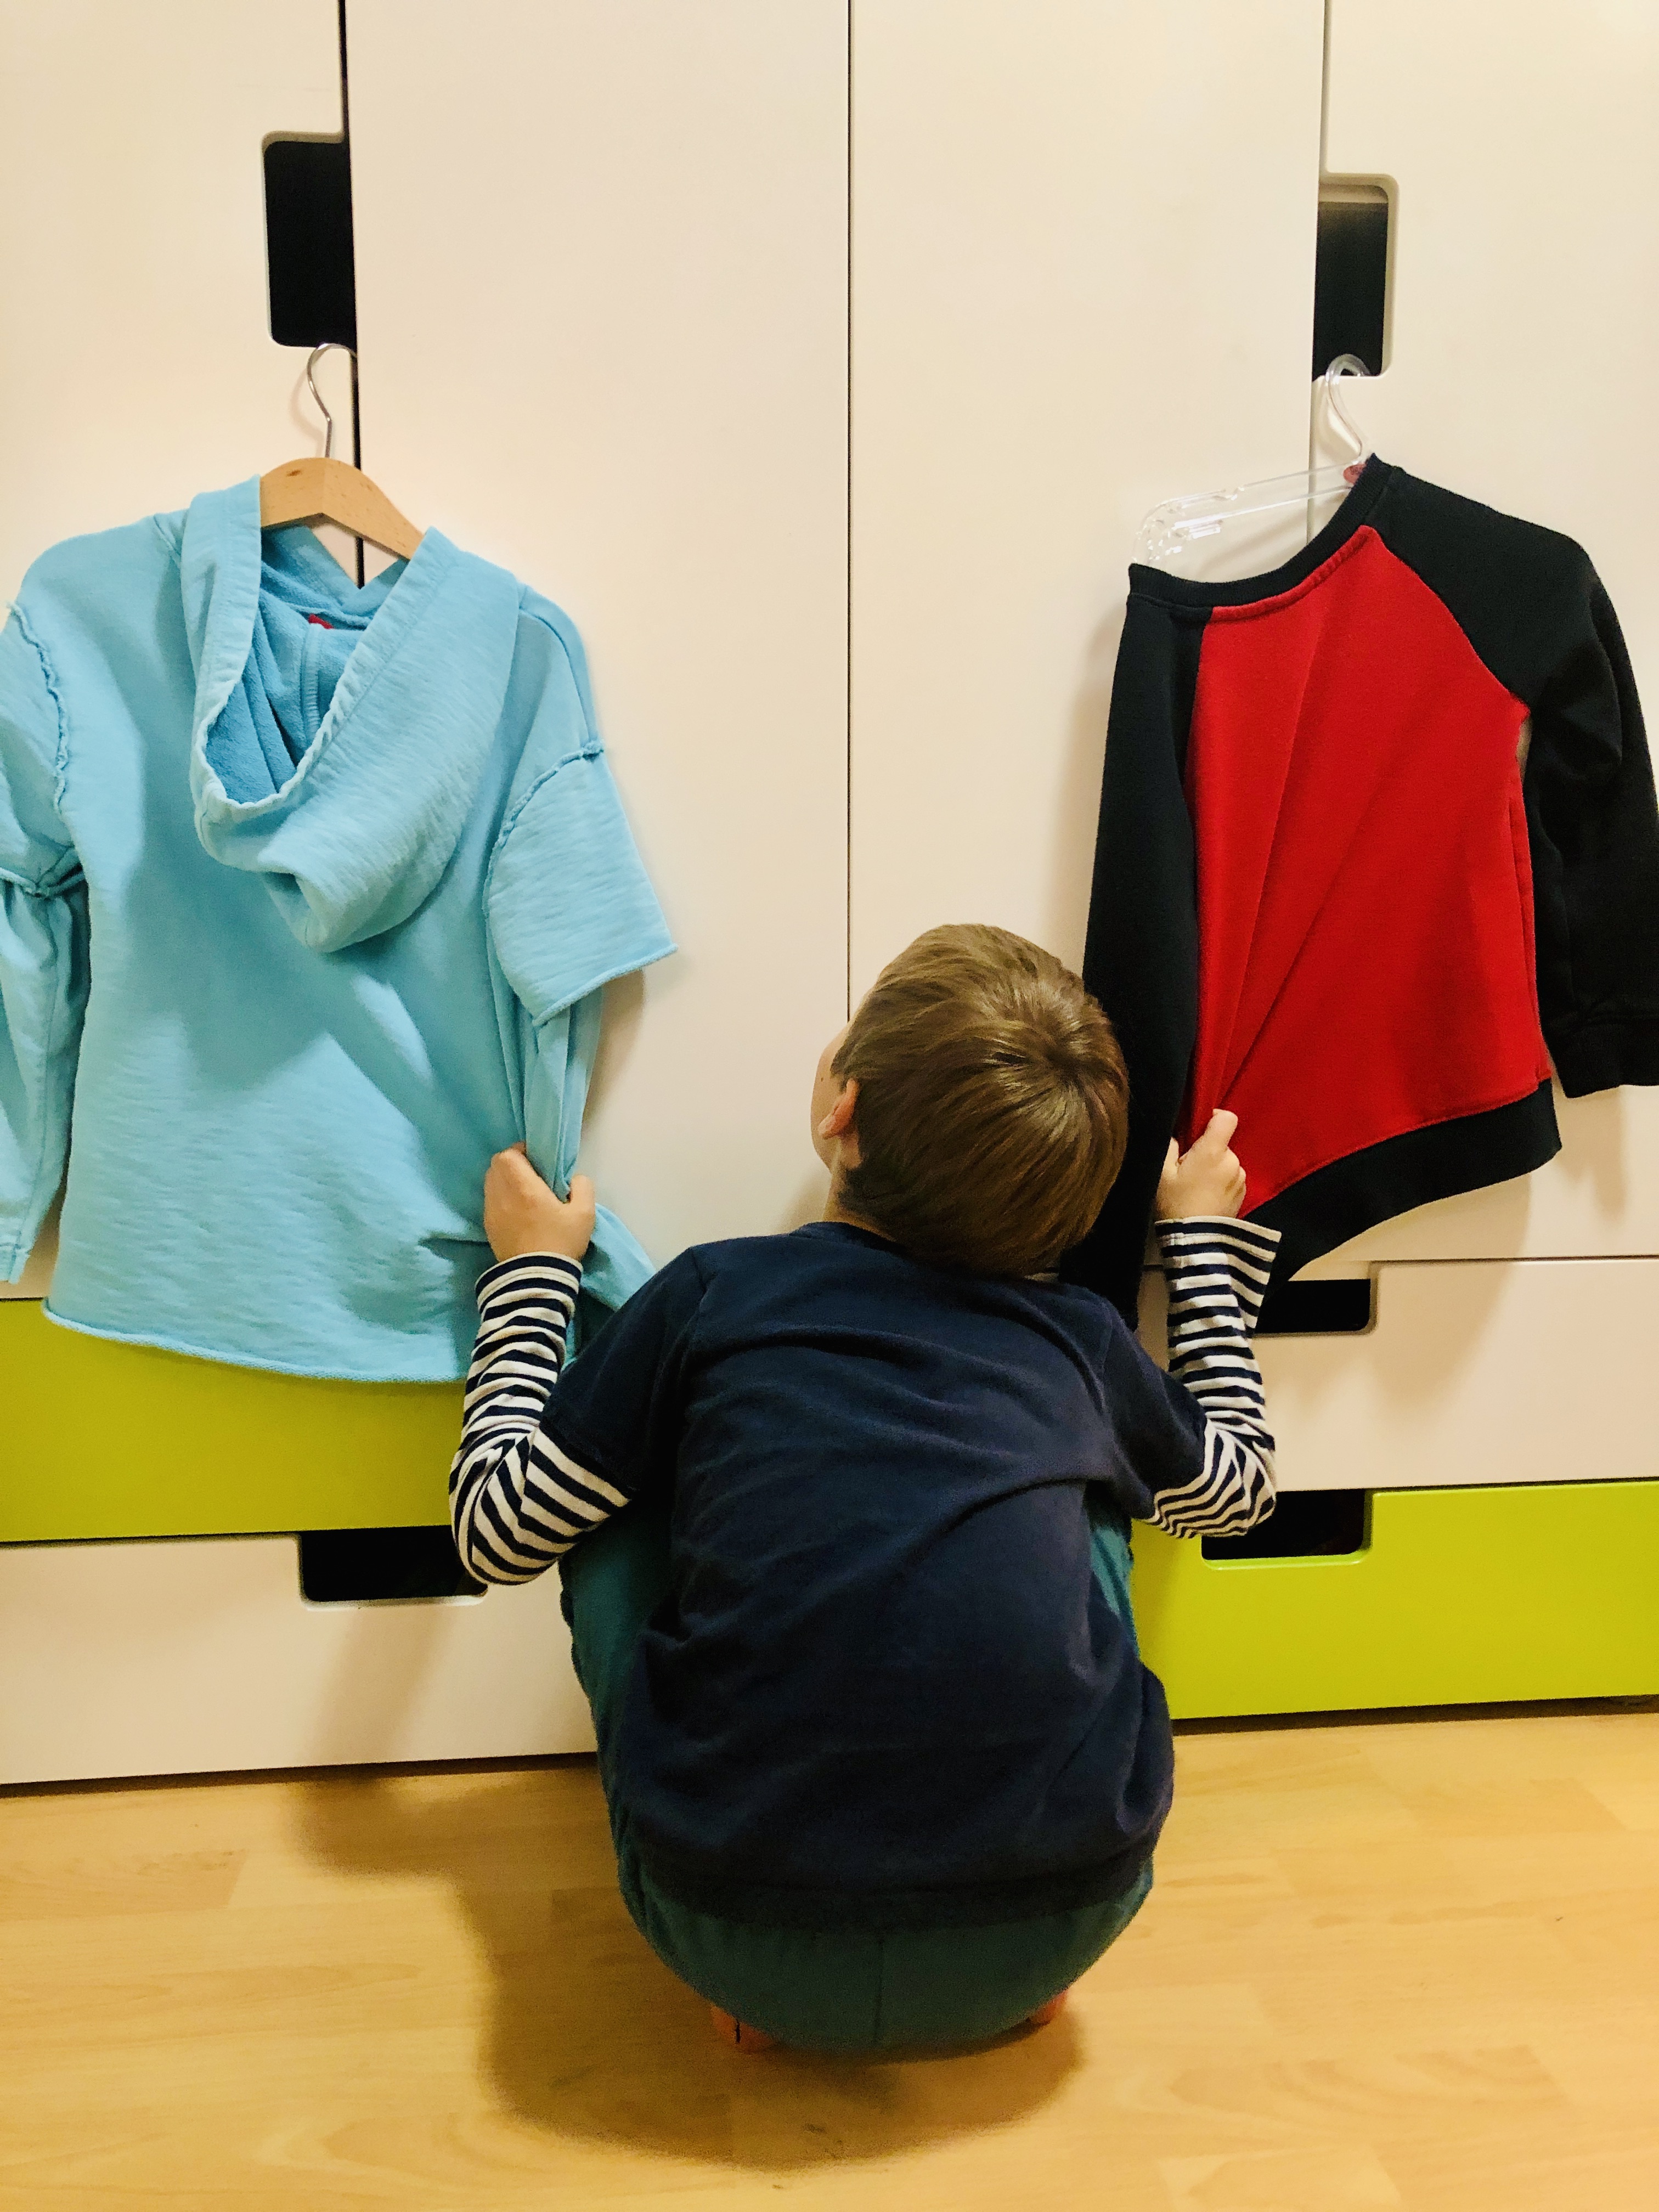 kid deciding which t-shirt to wear